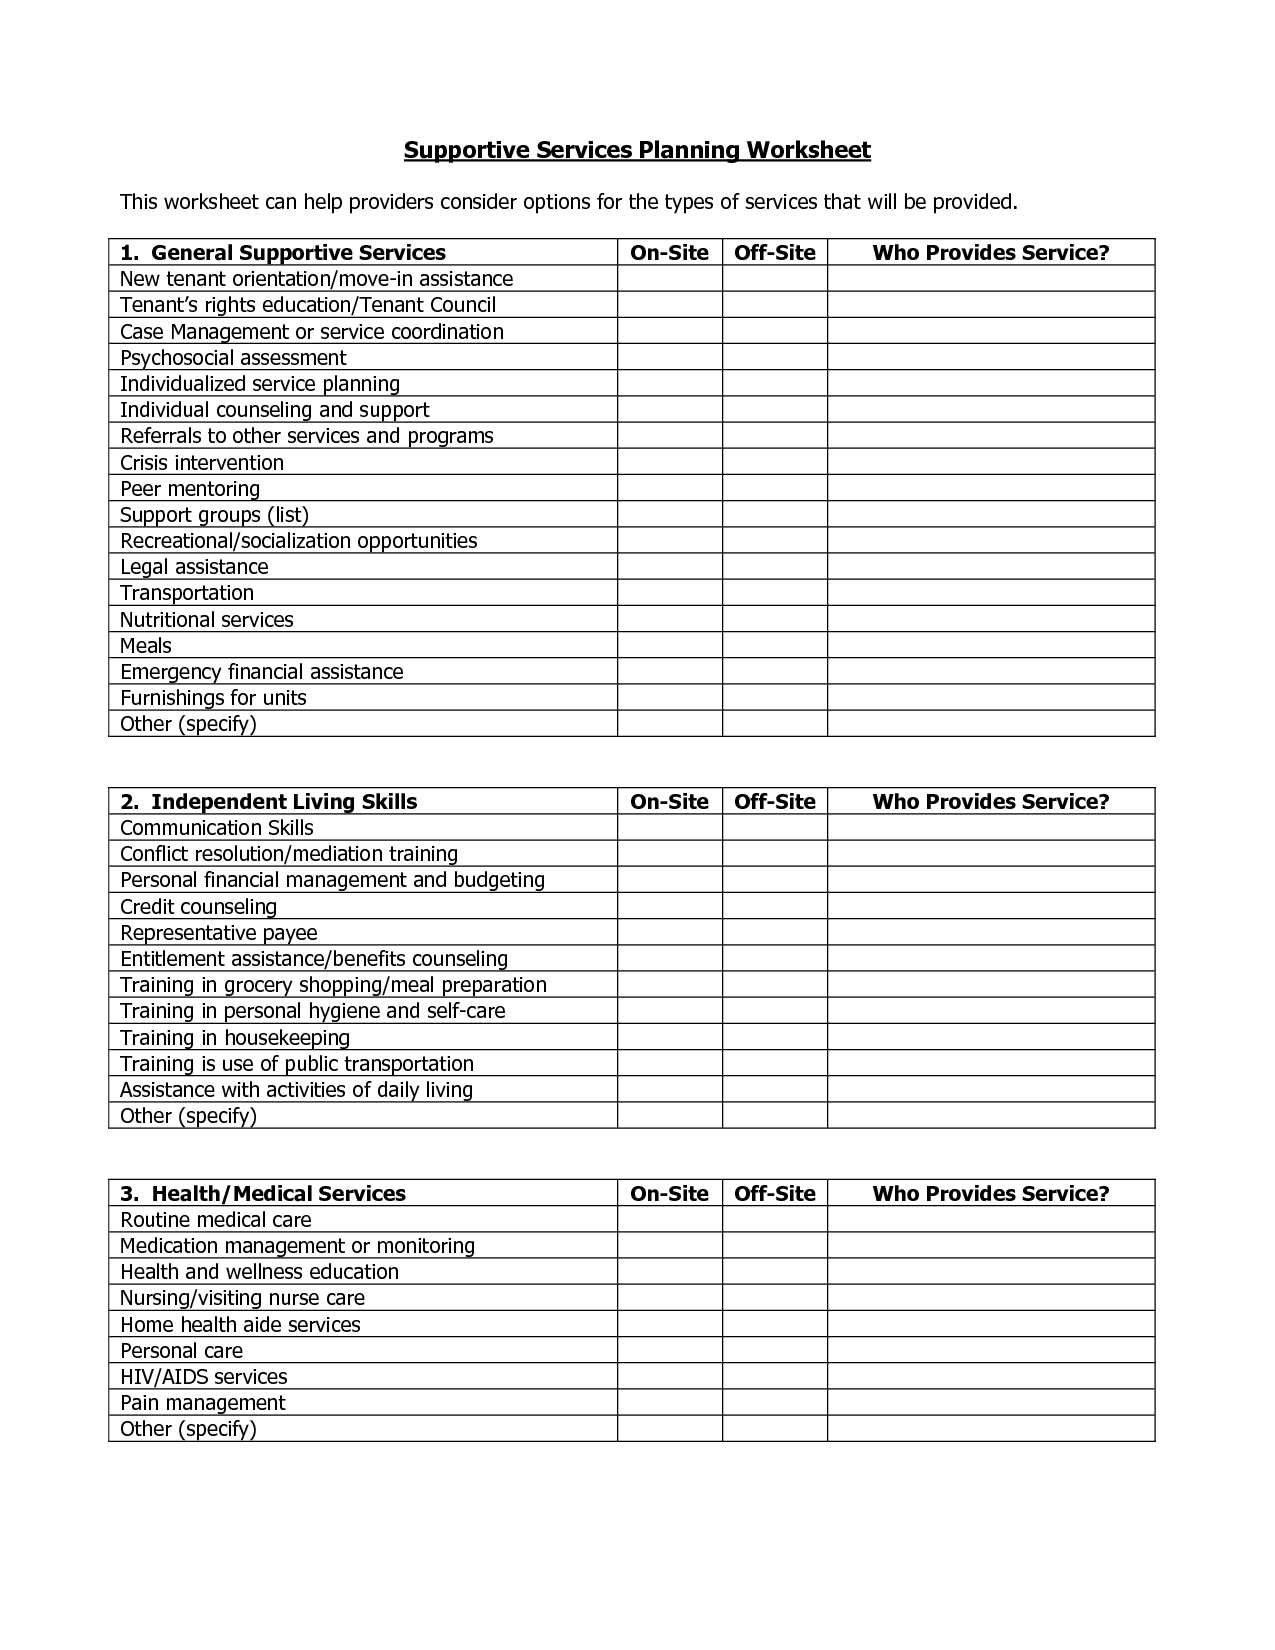 18 Best Images of My Relapse Prevention Plan Worksheet  Relapse Prevention Plan Worksheets 